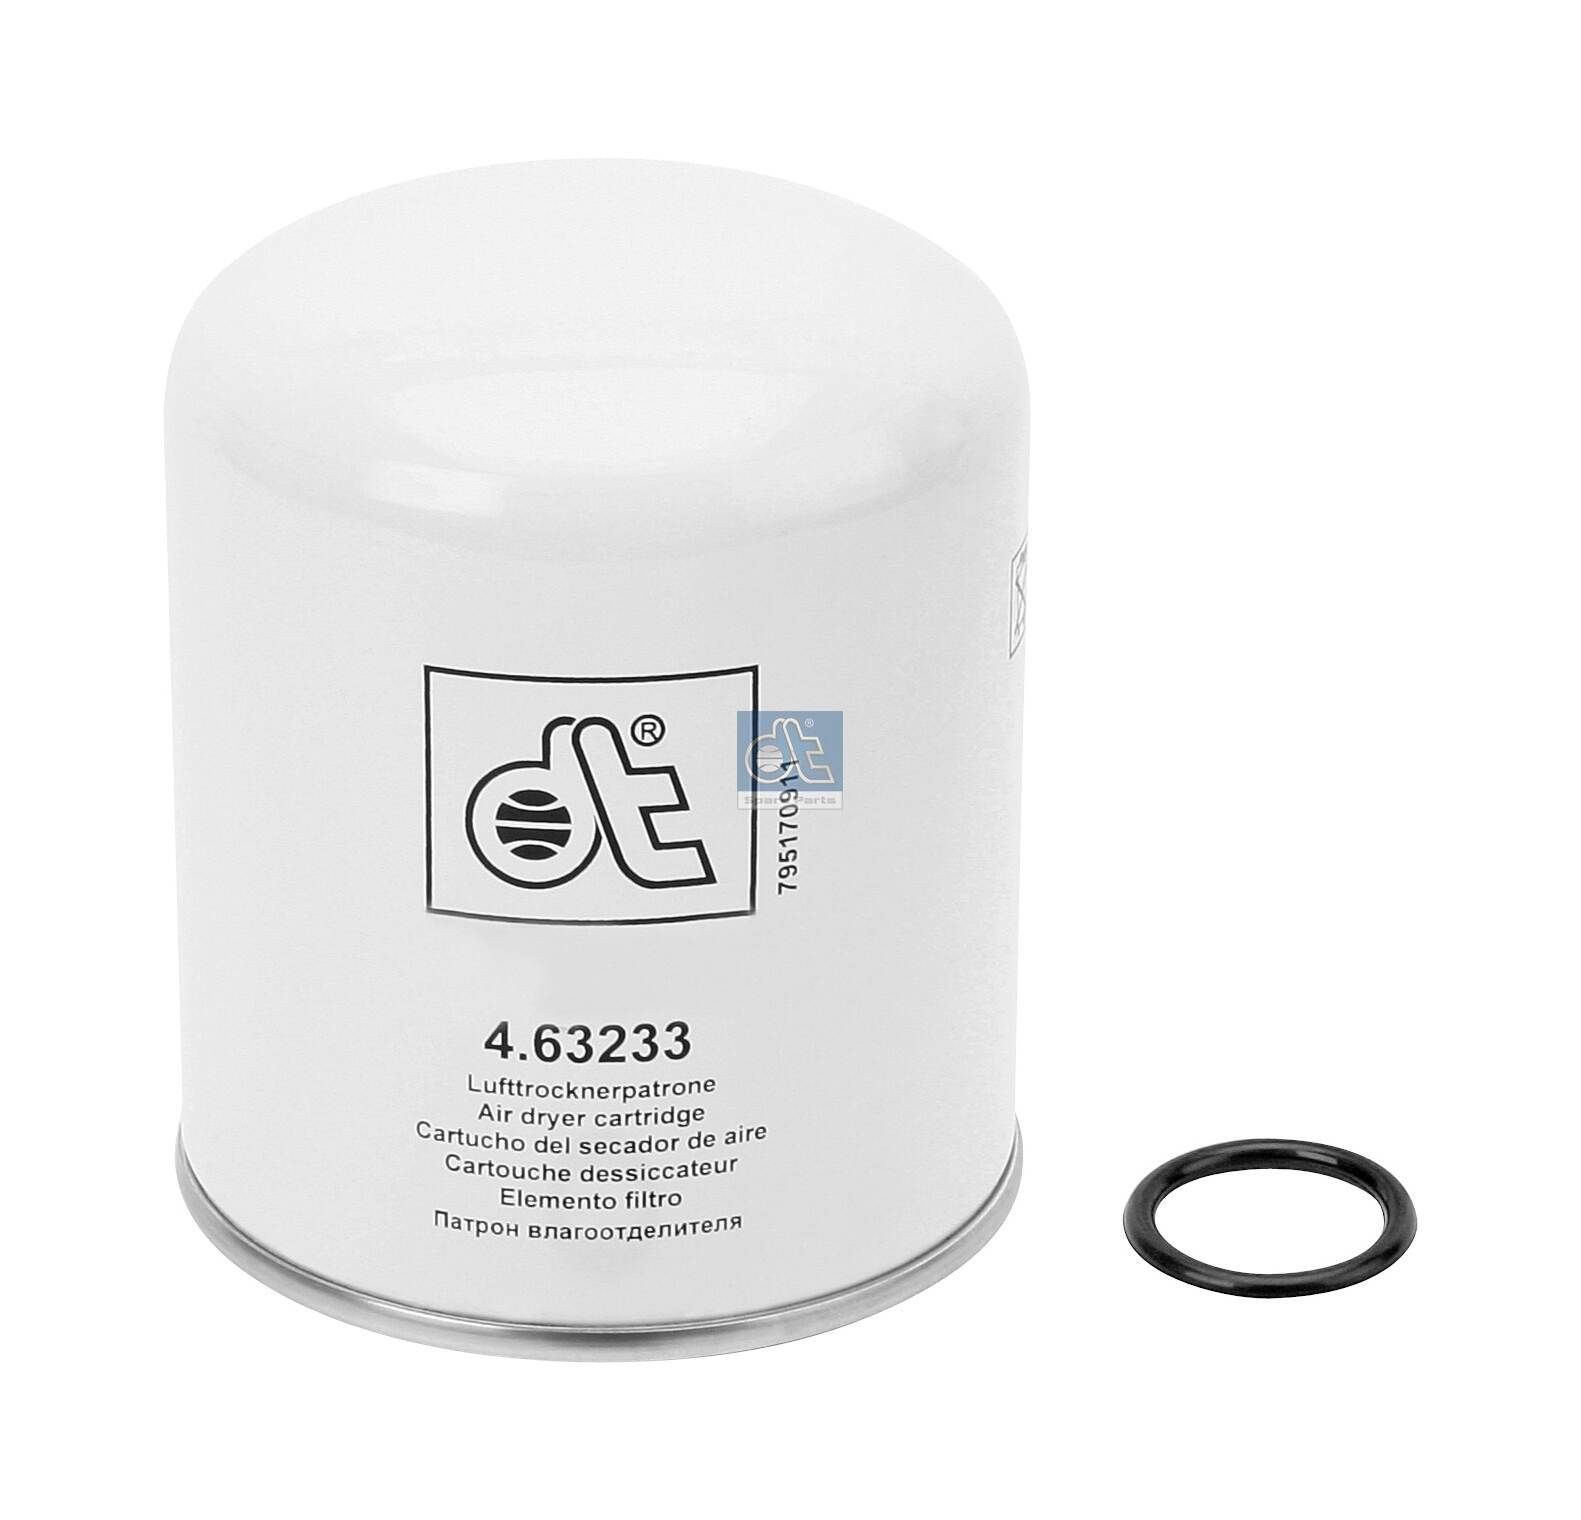 432 410 220 2 DT Spare Parts 4.63233 Air Dryer Cartridge, compressed-air system A 000 429 48 95